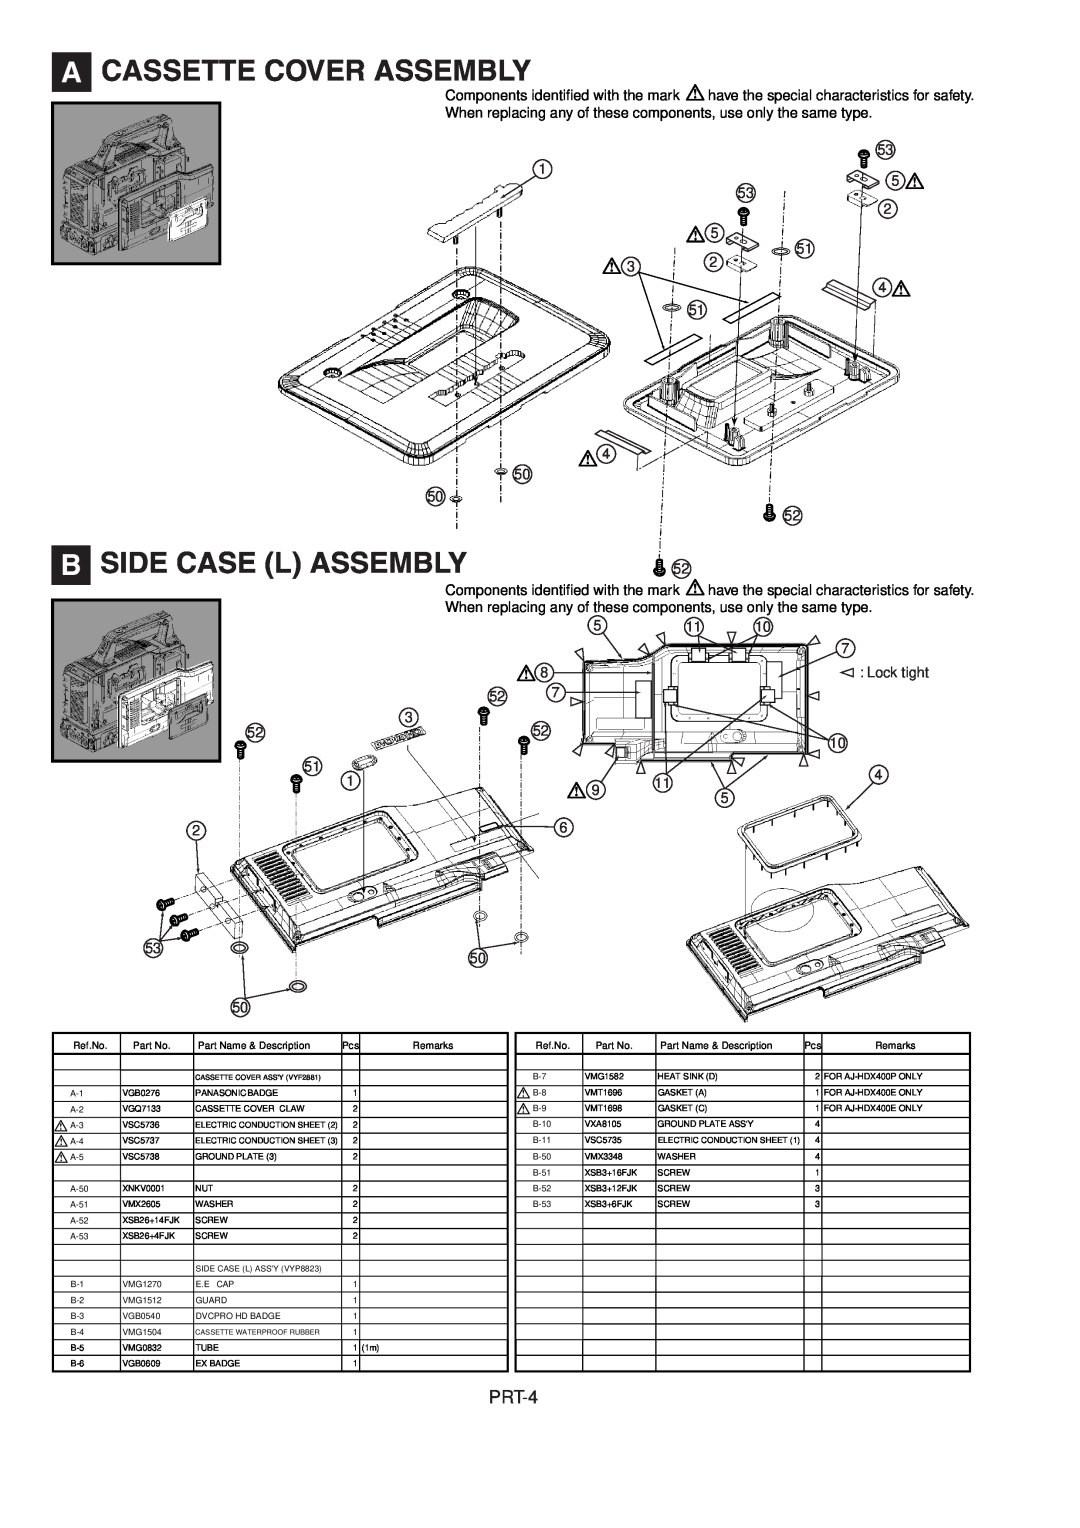 Panasonic AJ-HDX900MC manual A Cassette Cover Assembly, B Side Case L Assembly, PRT-4, Components identified with the mark 